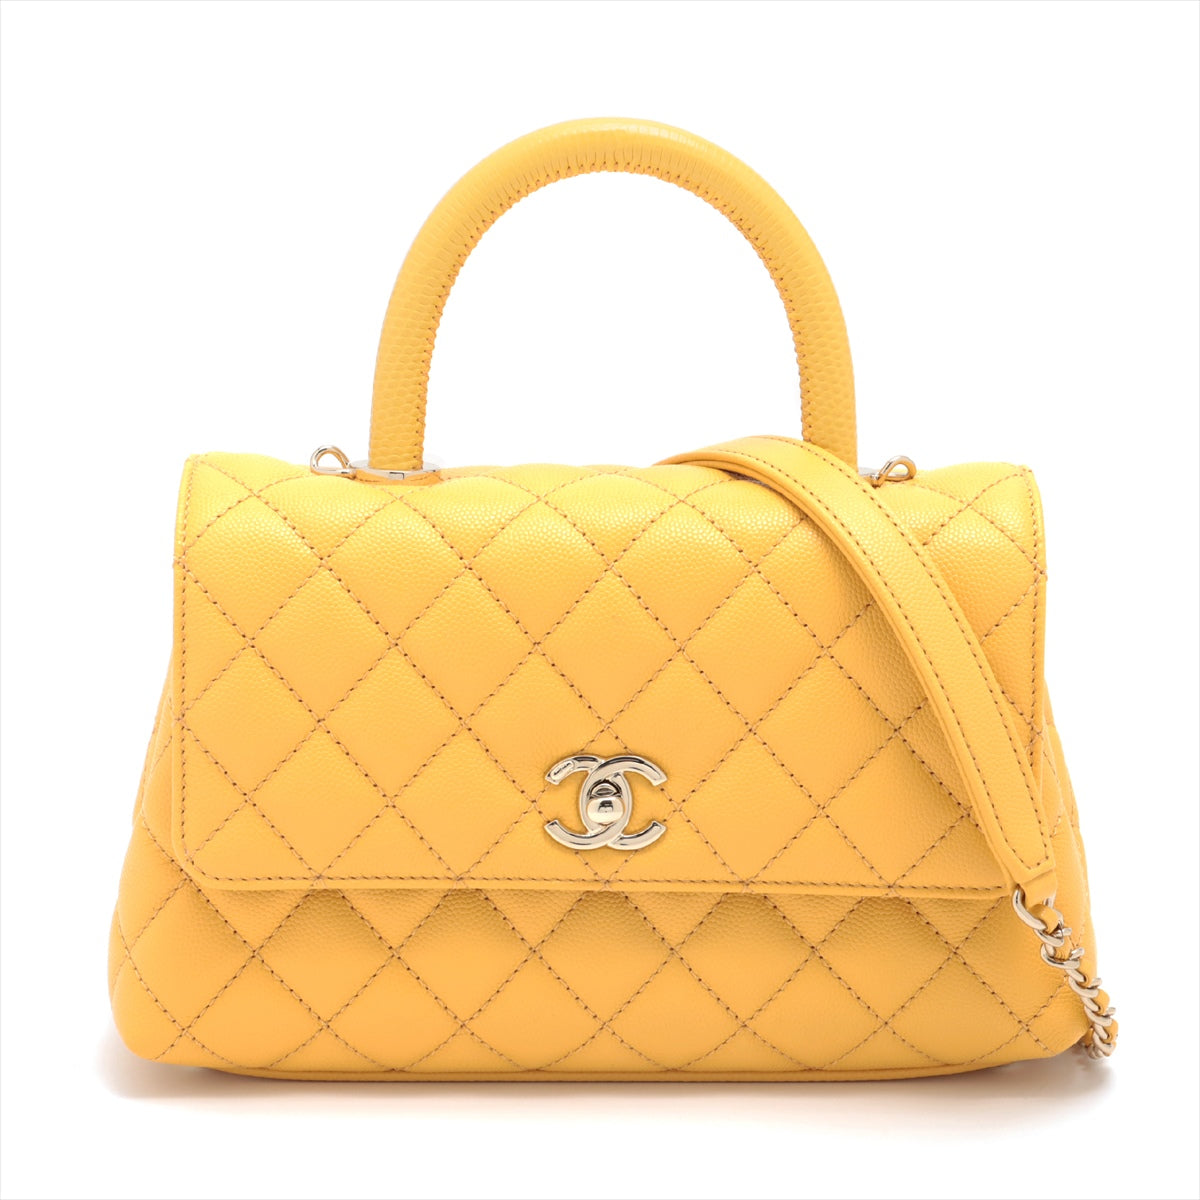 Chanel Coco Handle Caviarskin 2way handbag Yellow Gold Metal fittings There is an IC chip